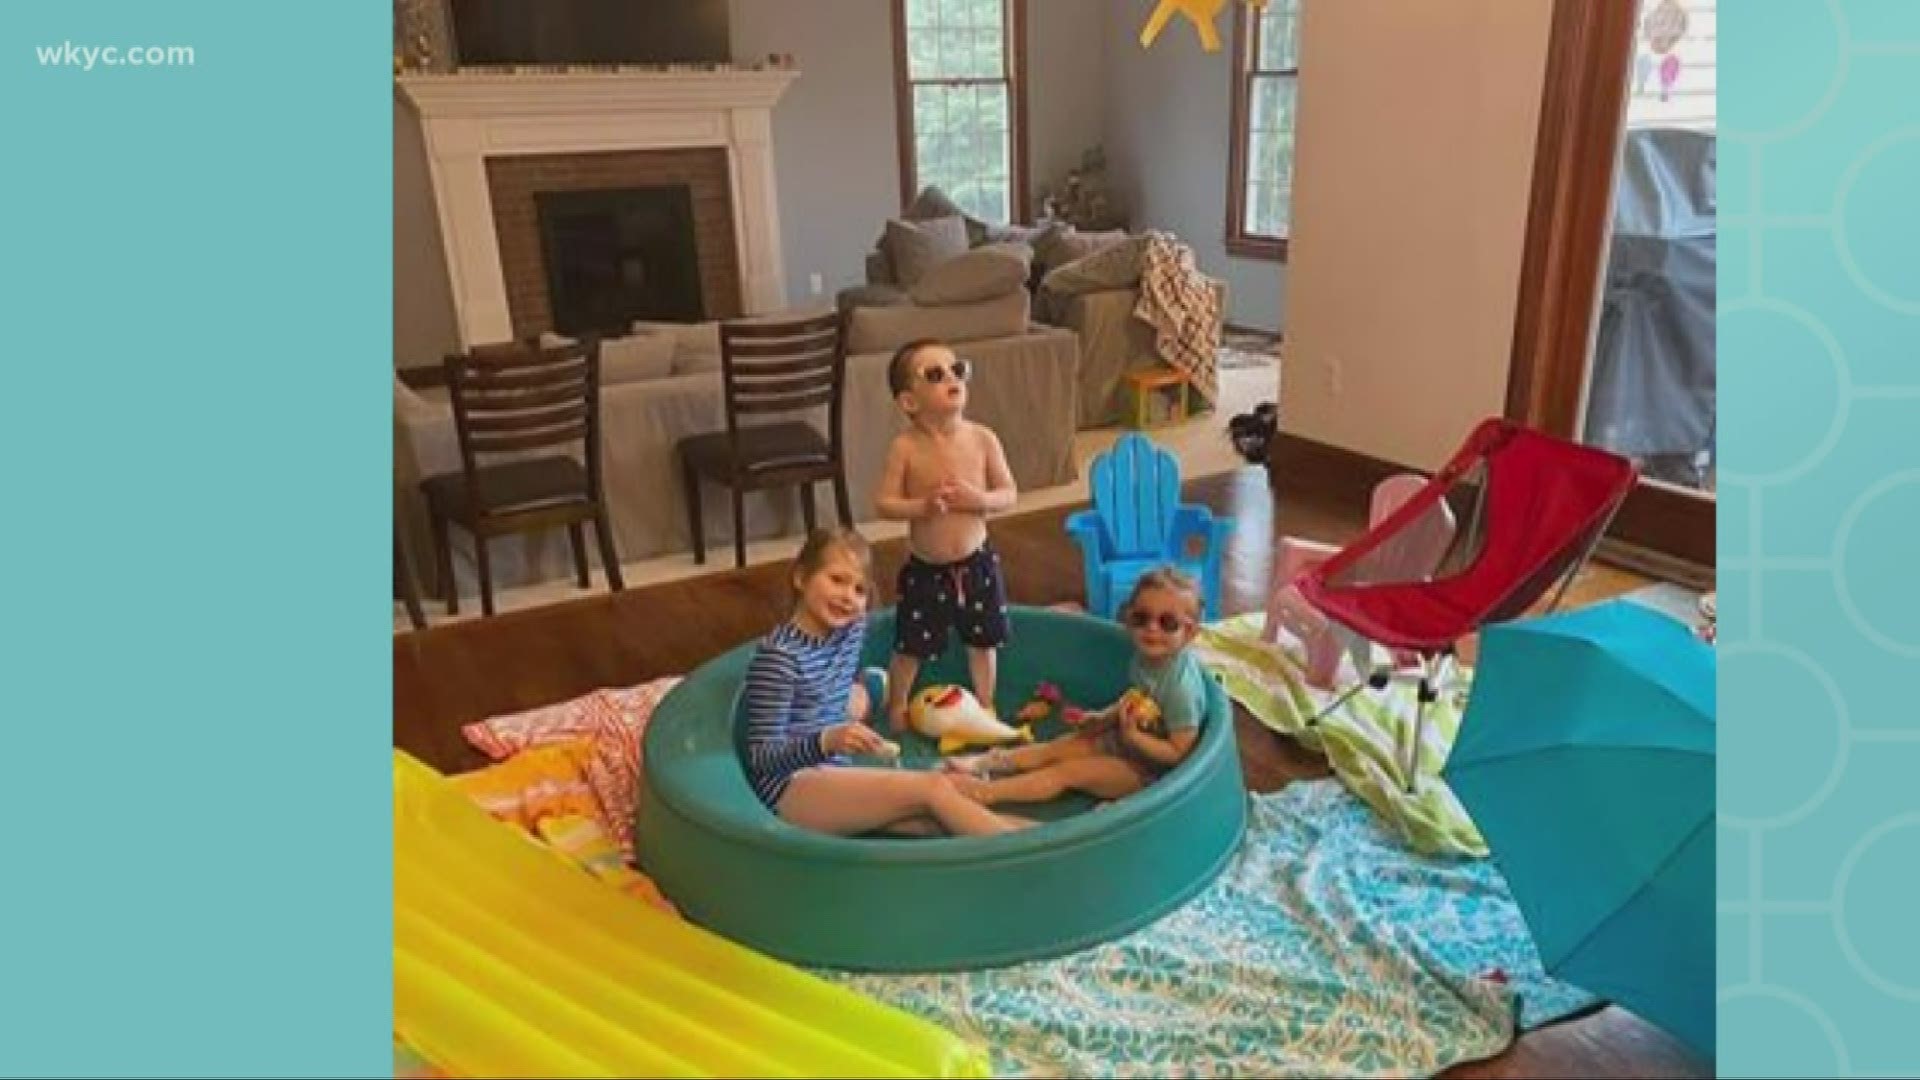 Bored? What's that? These parents are sharing some of the fun ways they're spending day-to-day life with their kids stuck at home as Ohio schools remain closed.